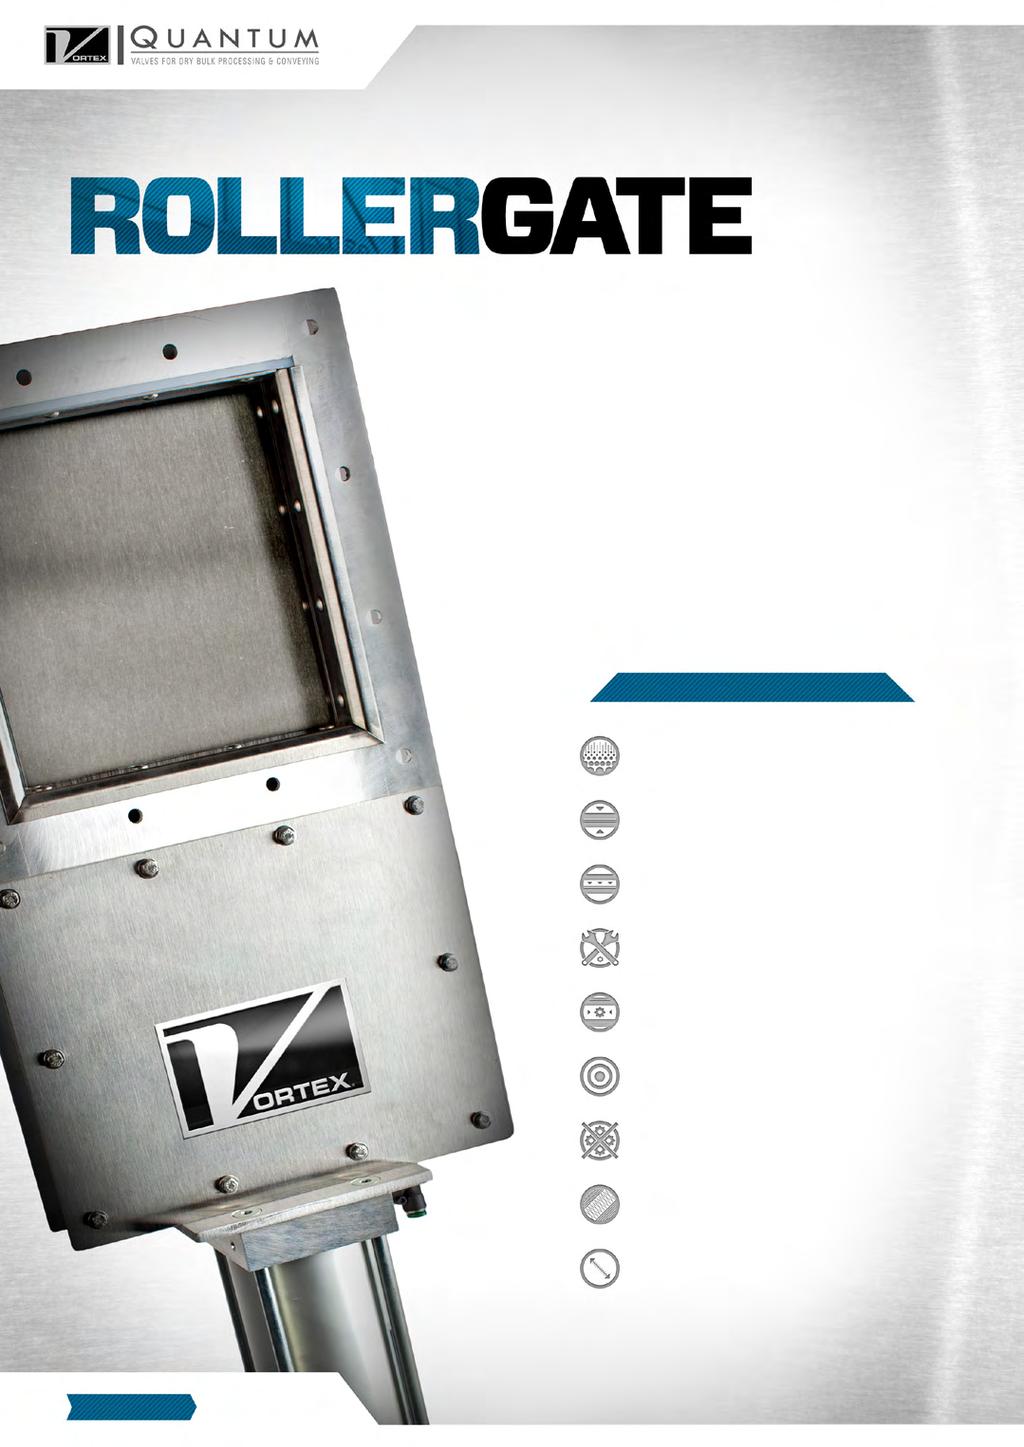 The Vortex Roller Gate is the best choice for handling dry material in gravity flow applications.